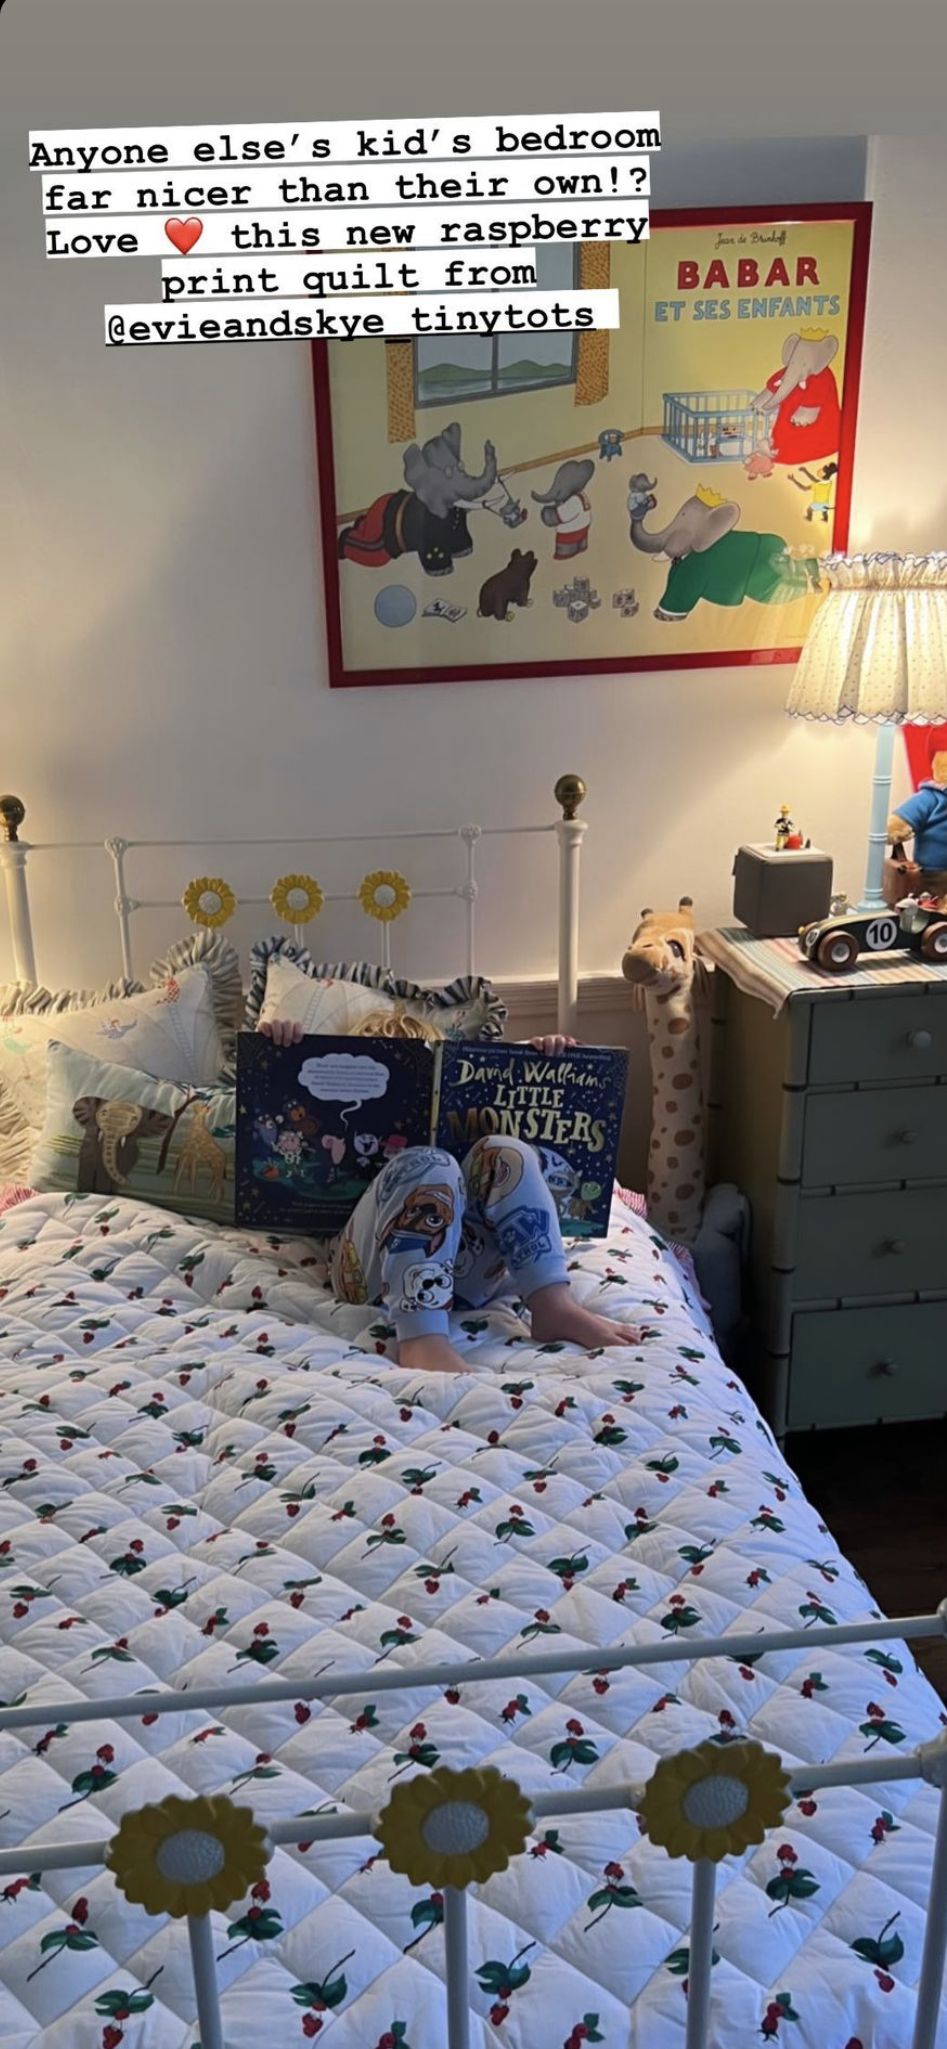 Wilfred Johnson reading a bedtime story in his room